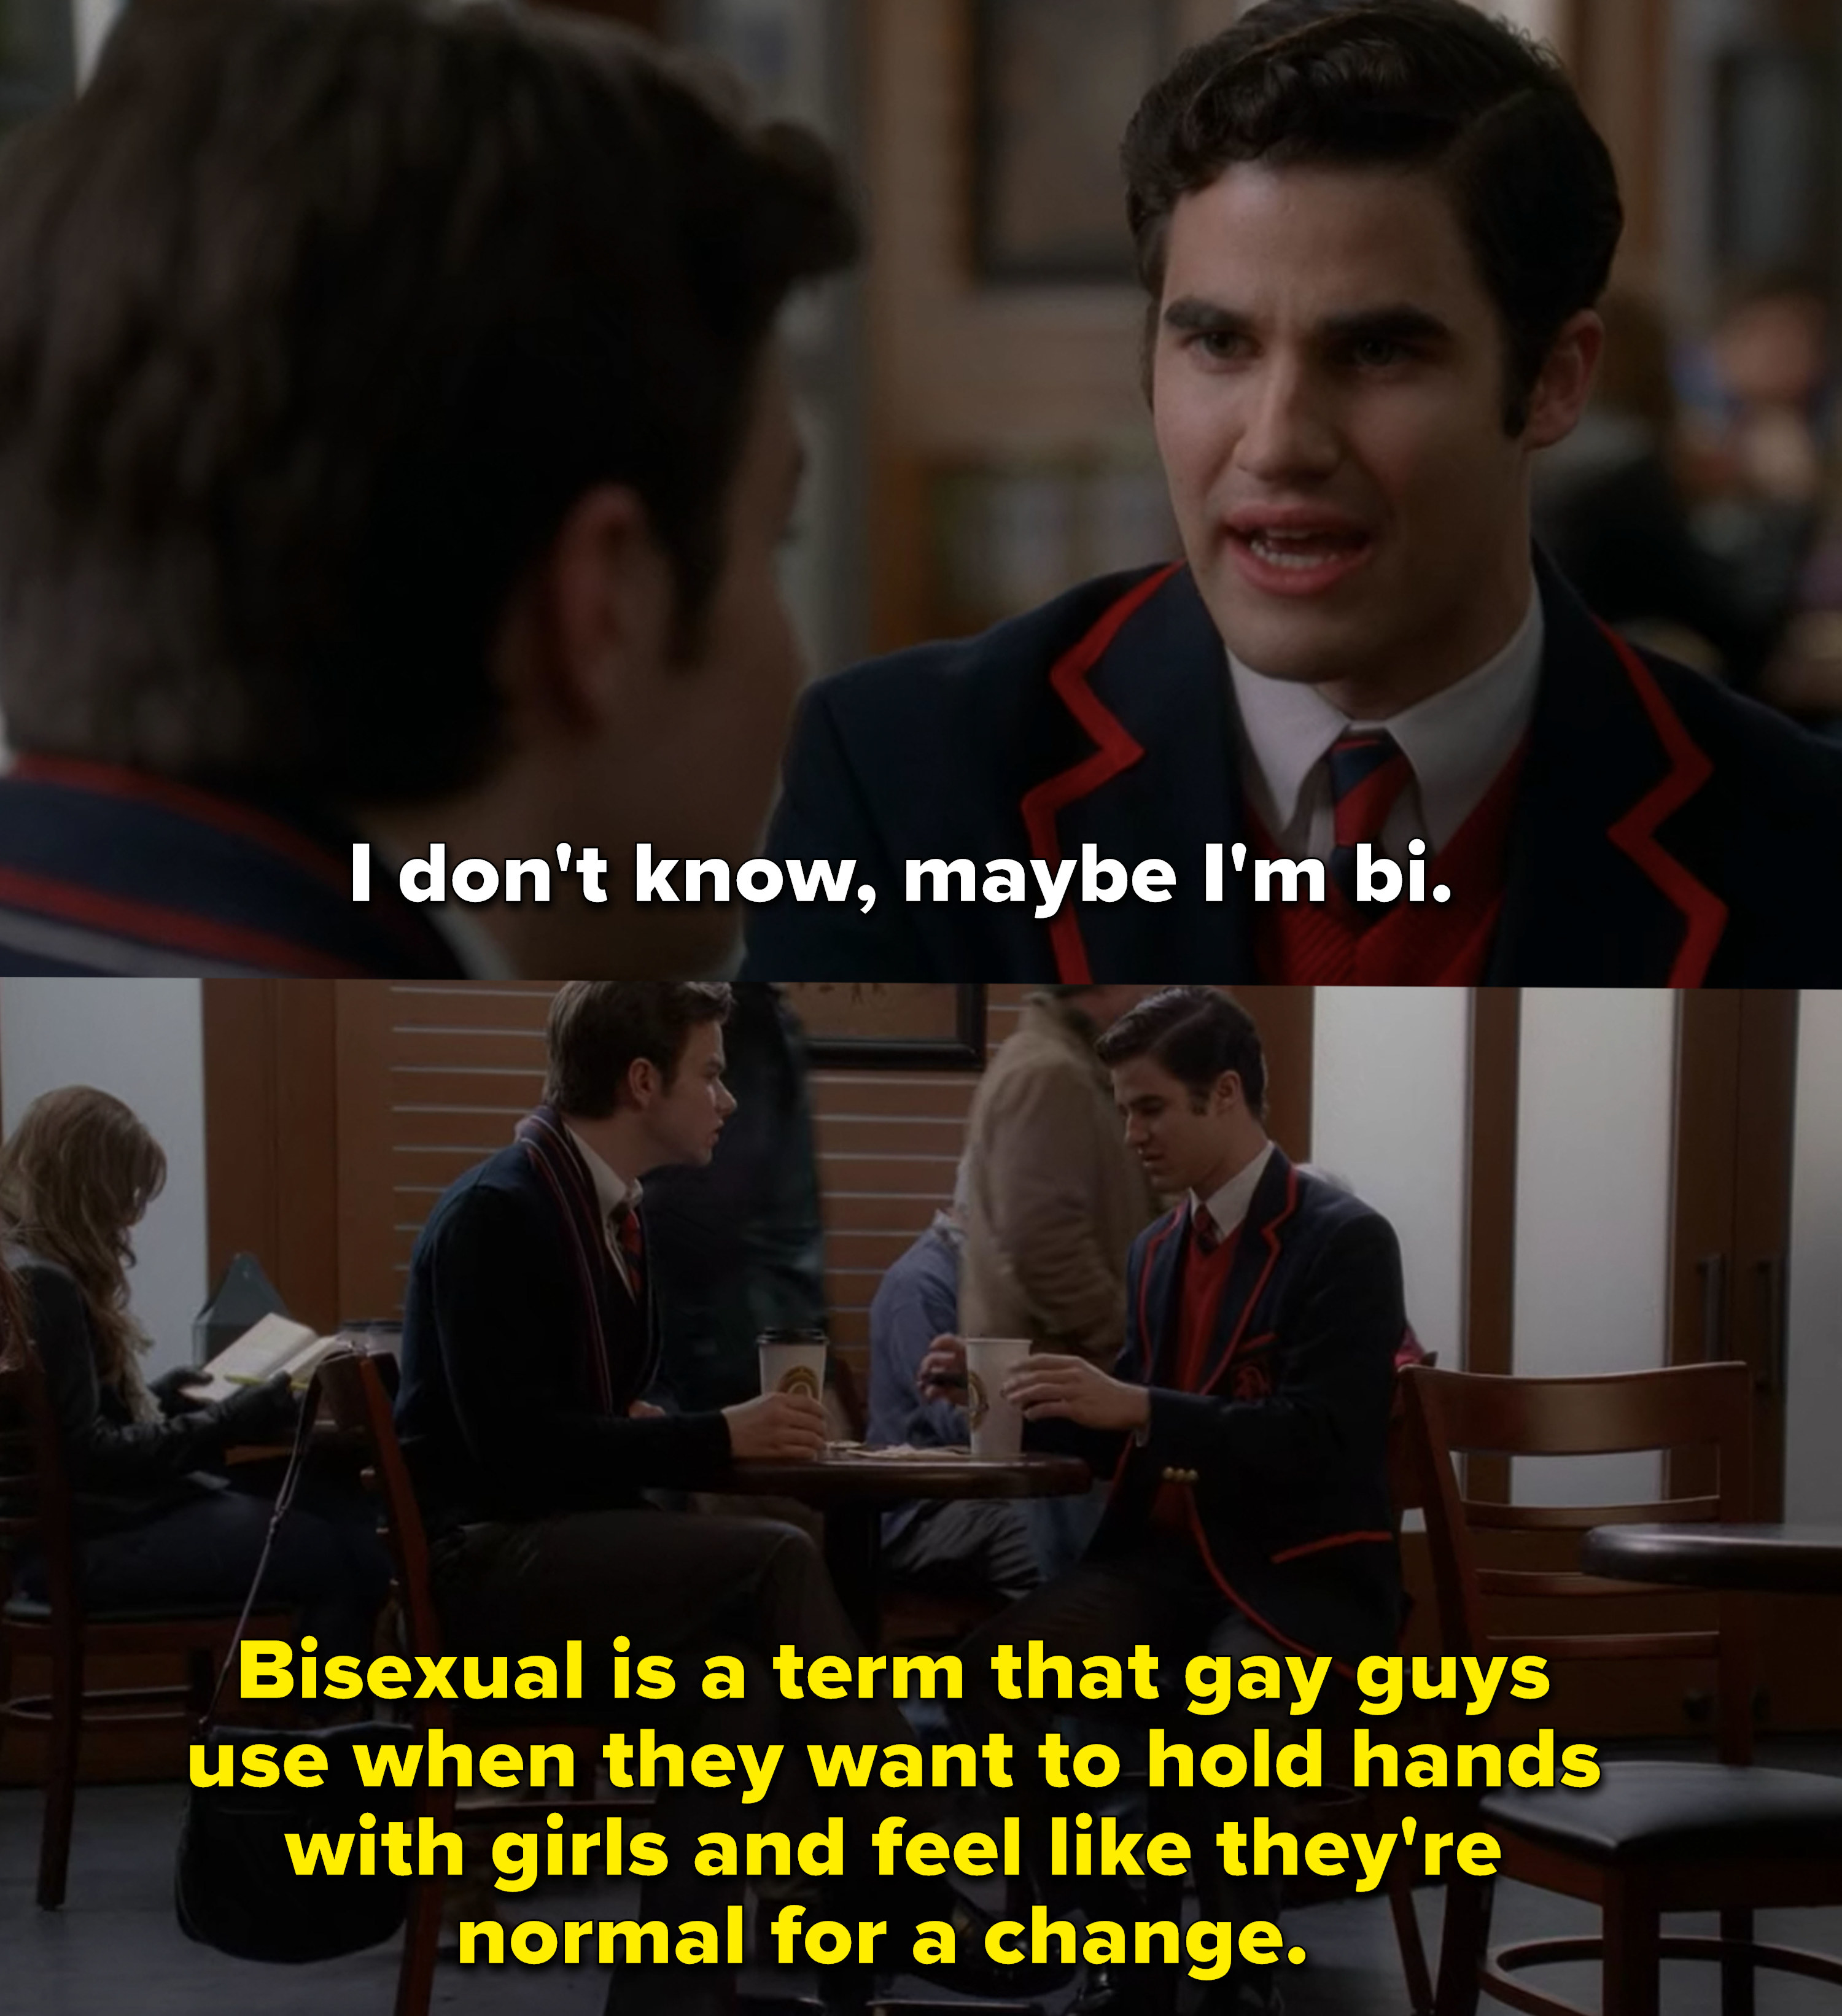 Kurt on &quot;Glee&quot; tells Blaine that bisexual is &quot;a term that gay guys use when they want to hold hands with girls and feel like they&#x27;re normal for a change&quot;